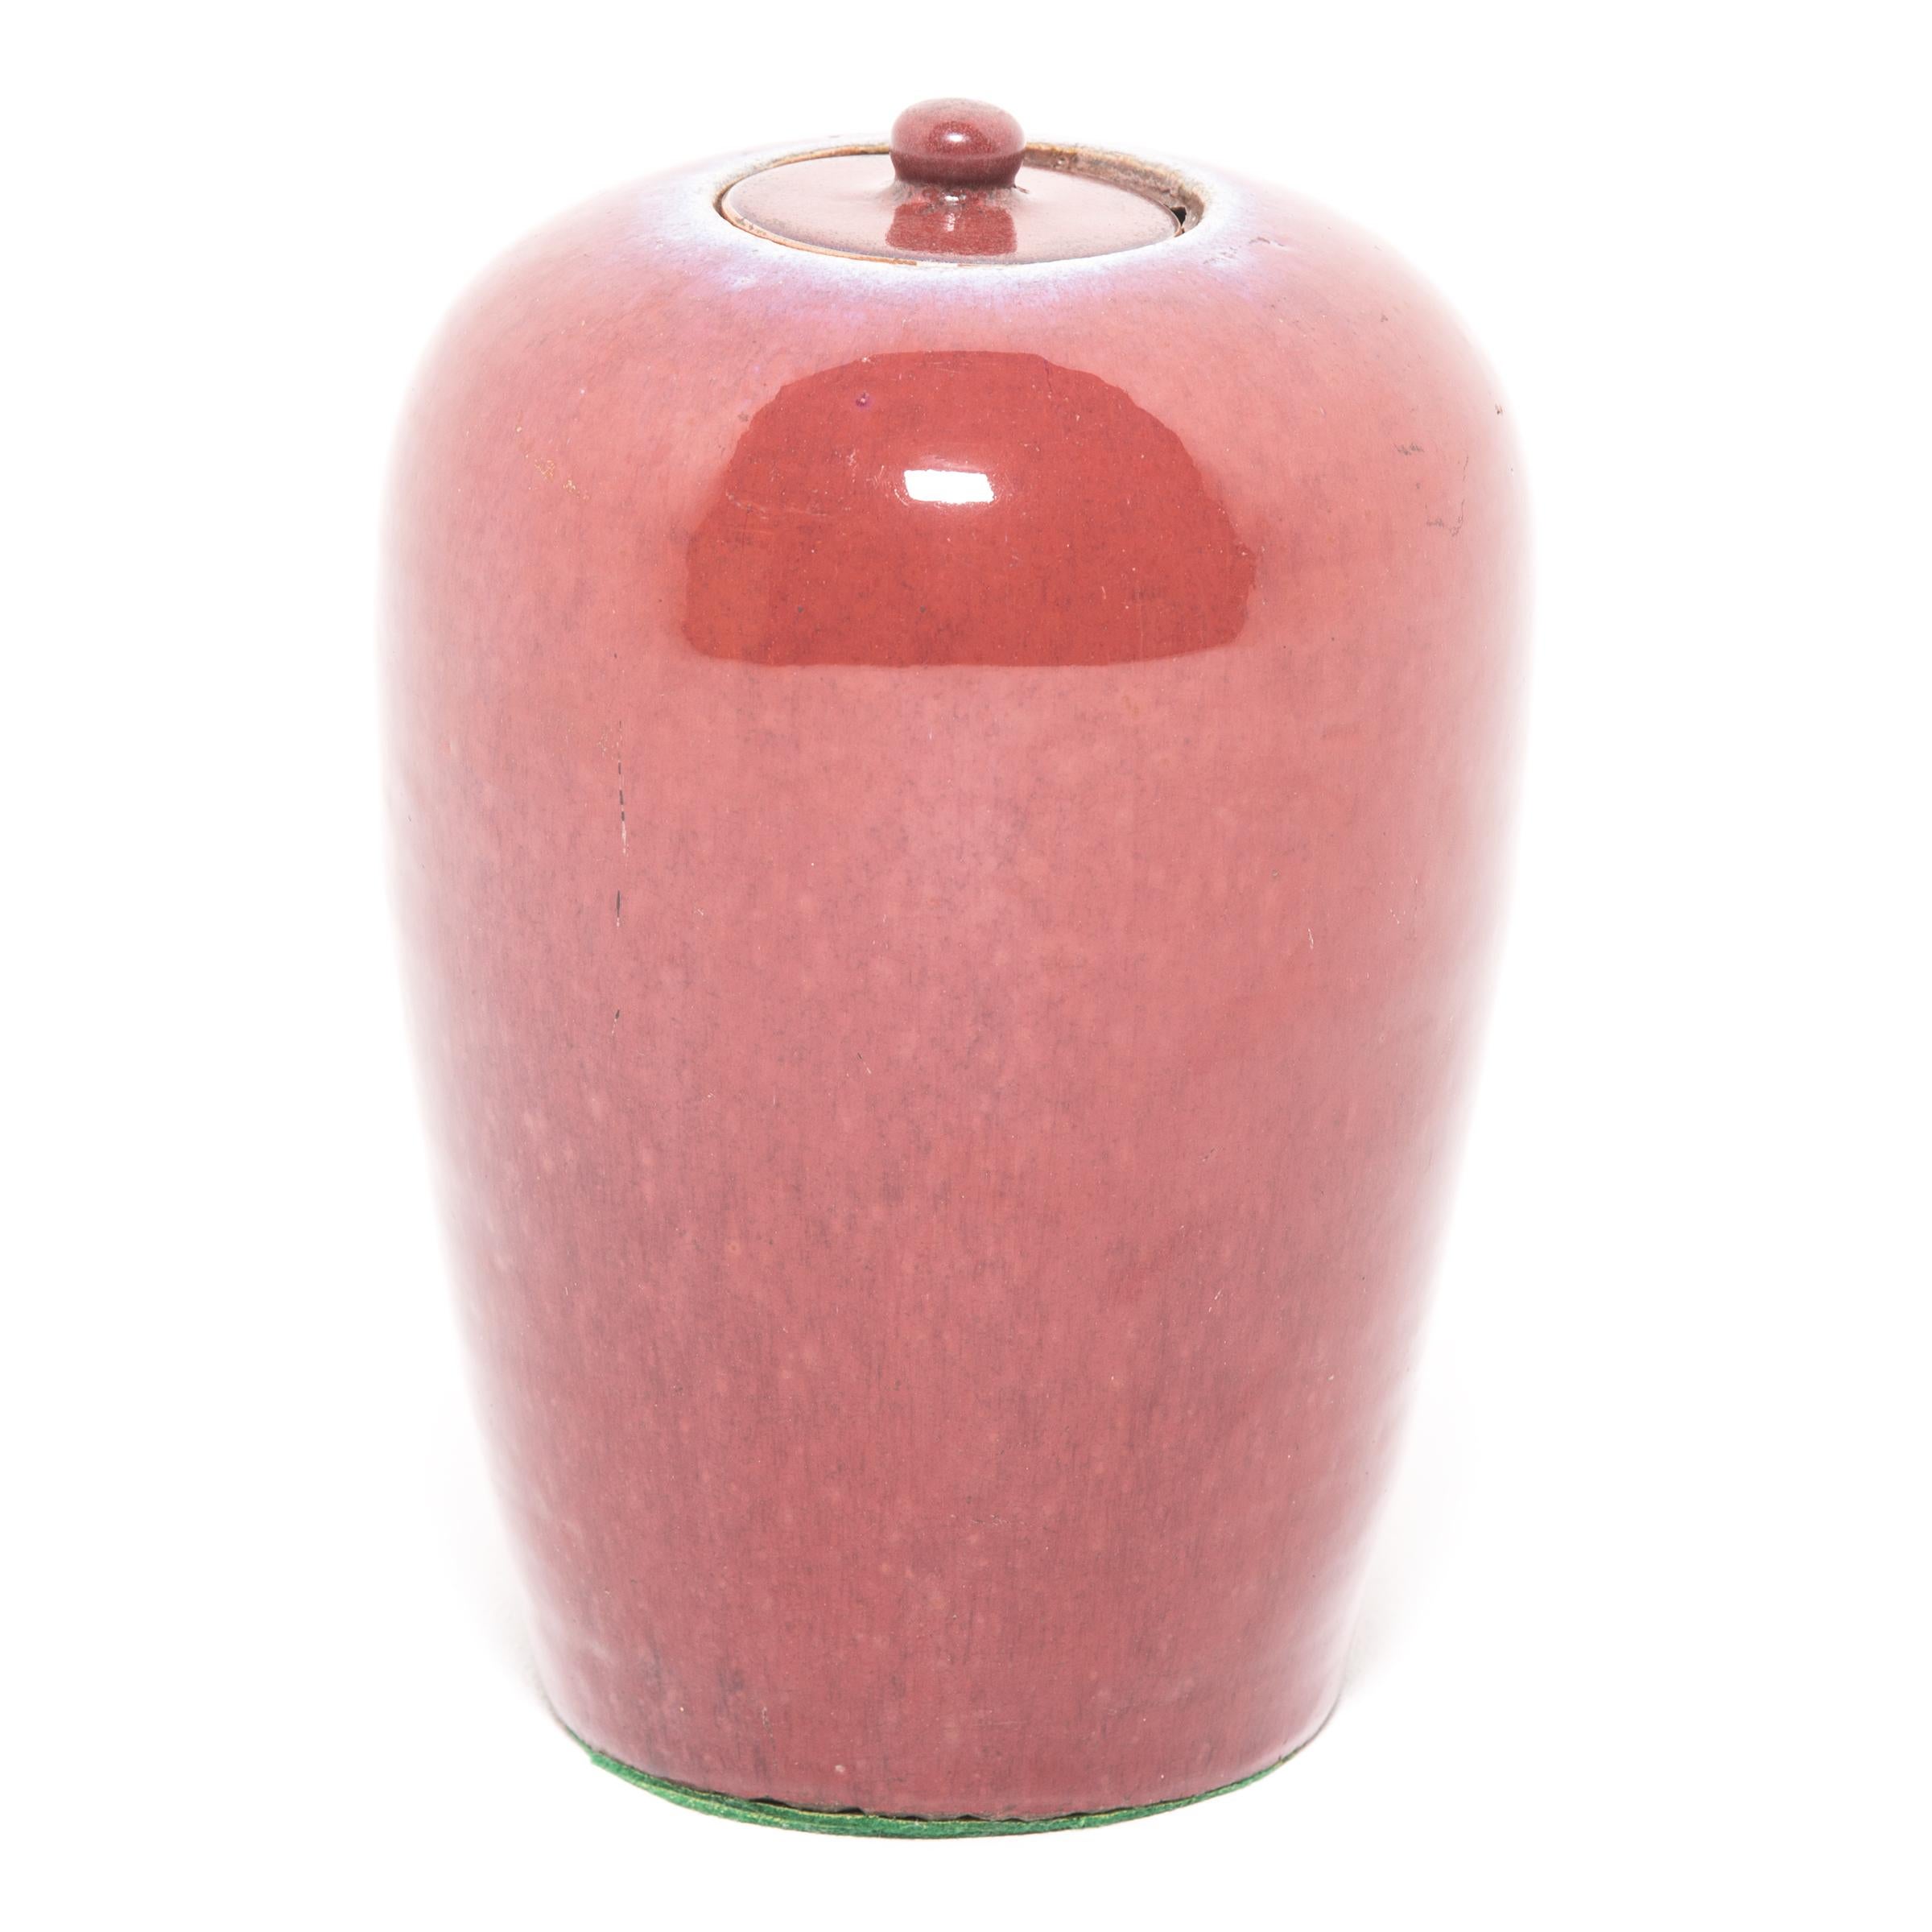 Qing Chinese Peach Blossom Ginger Jar